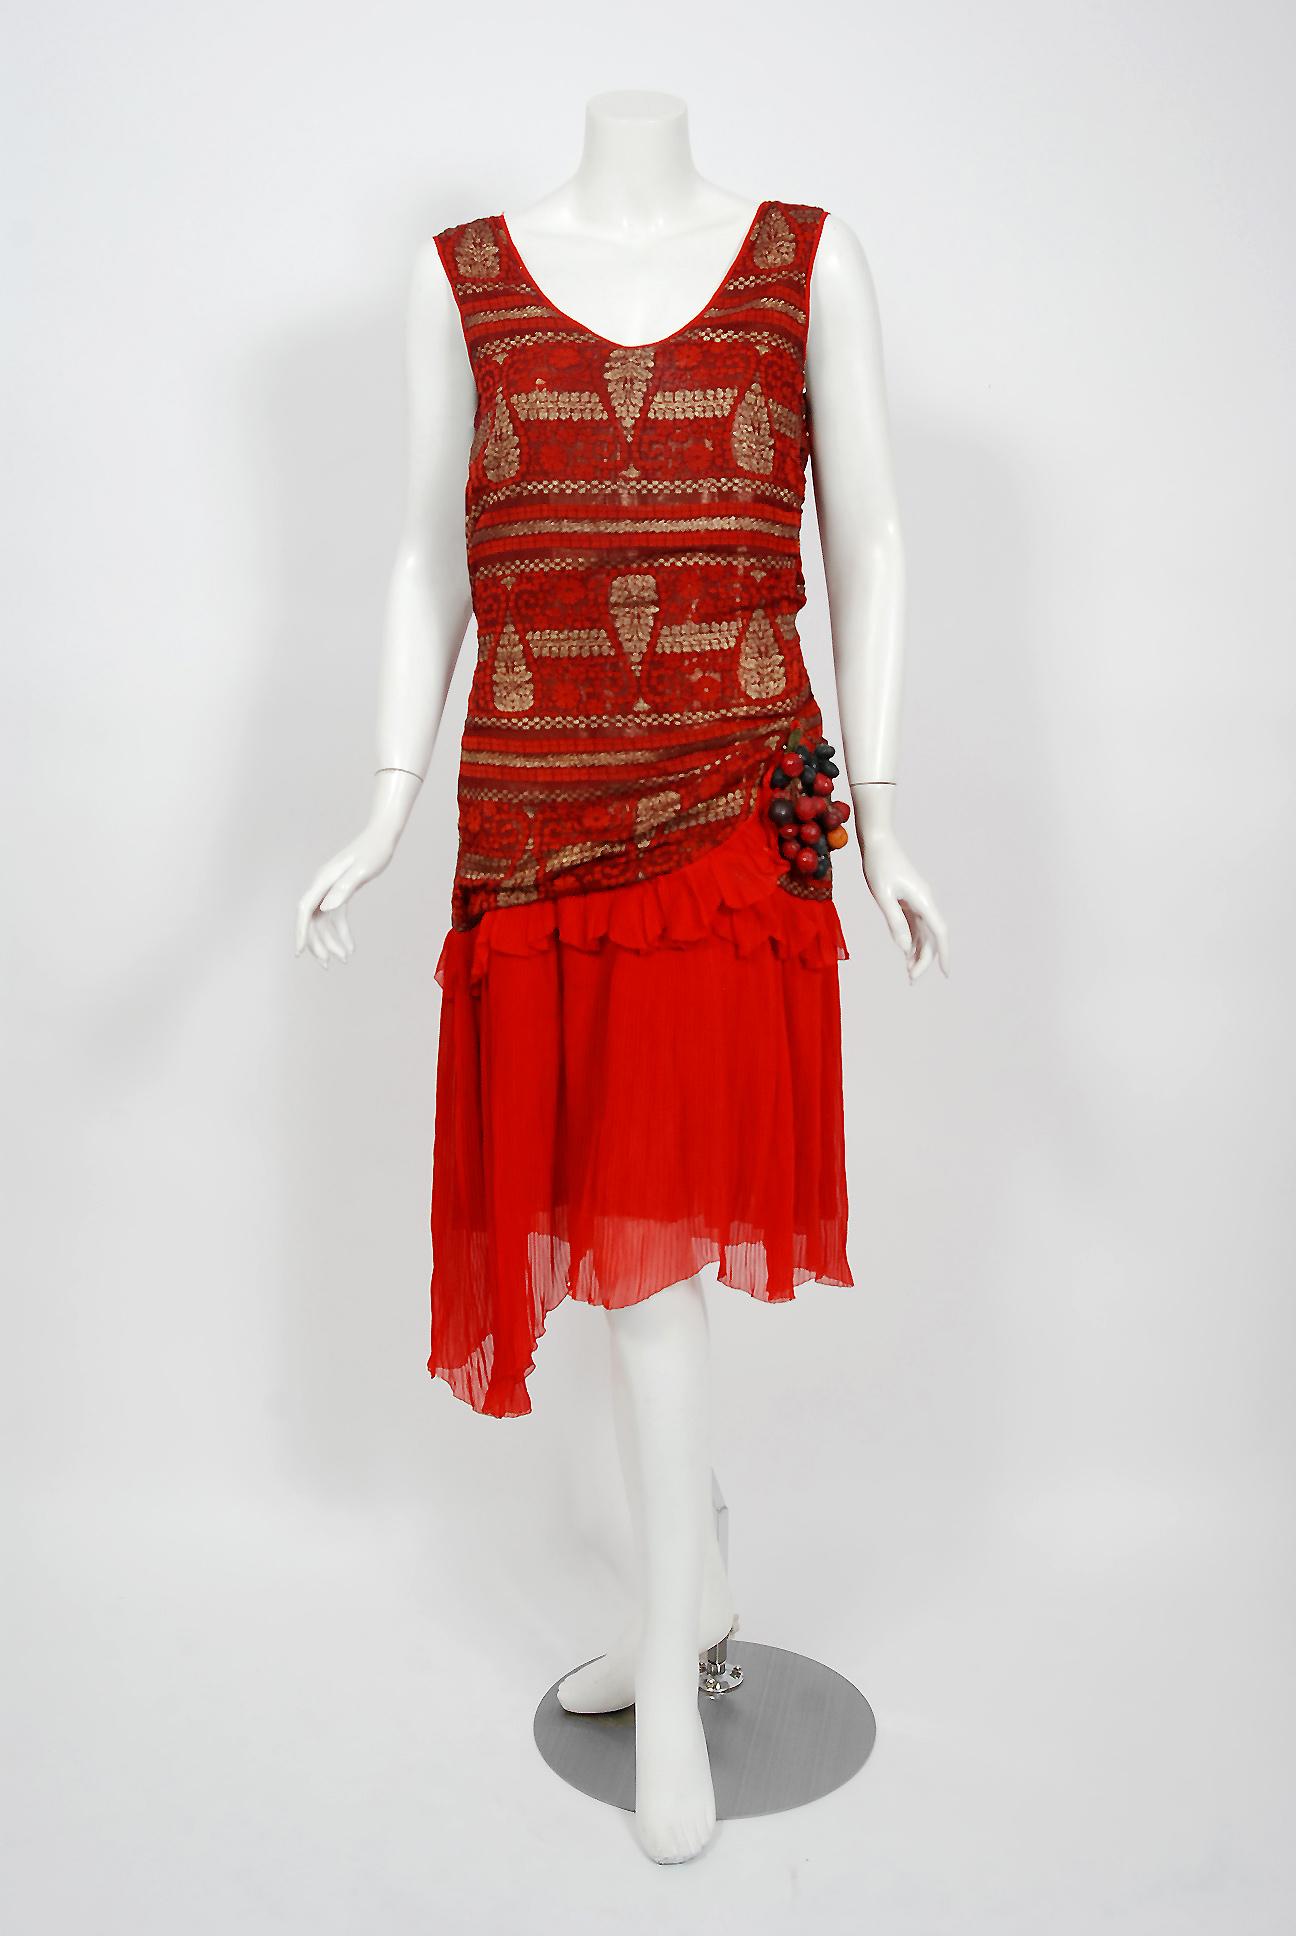 Breathtaking 1920's flapper dance dress in the prettiest metallic gold and red color combination. The garment's simple unstructured style is so modern; the fine couture fabrics are a treasure trove of needle art. The dress is fashioned from